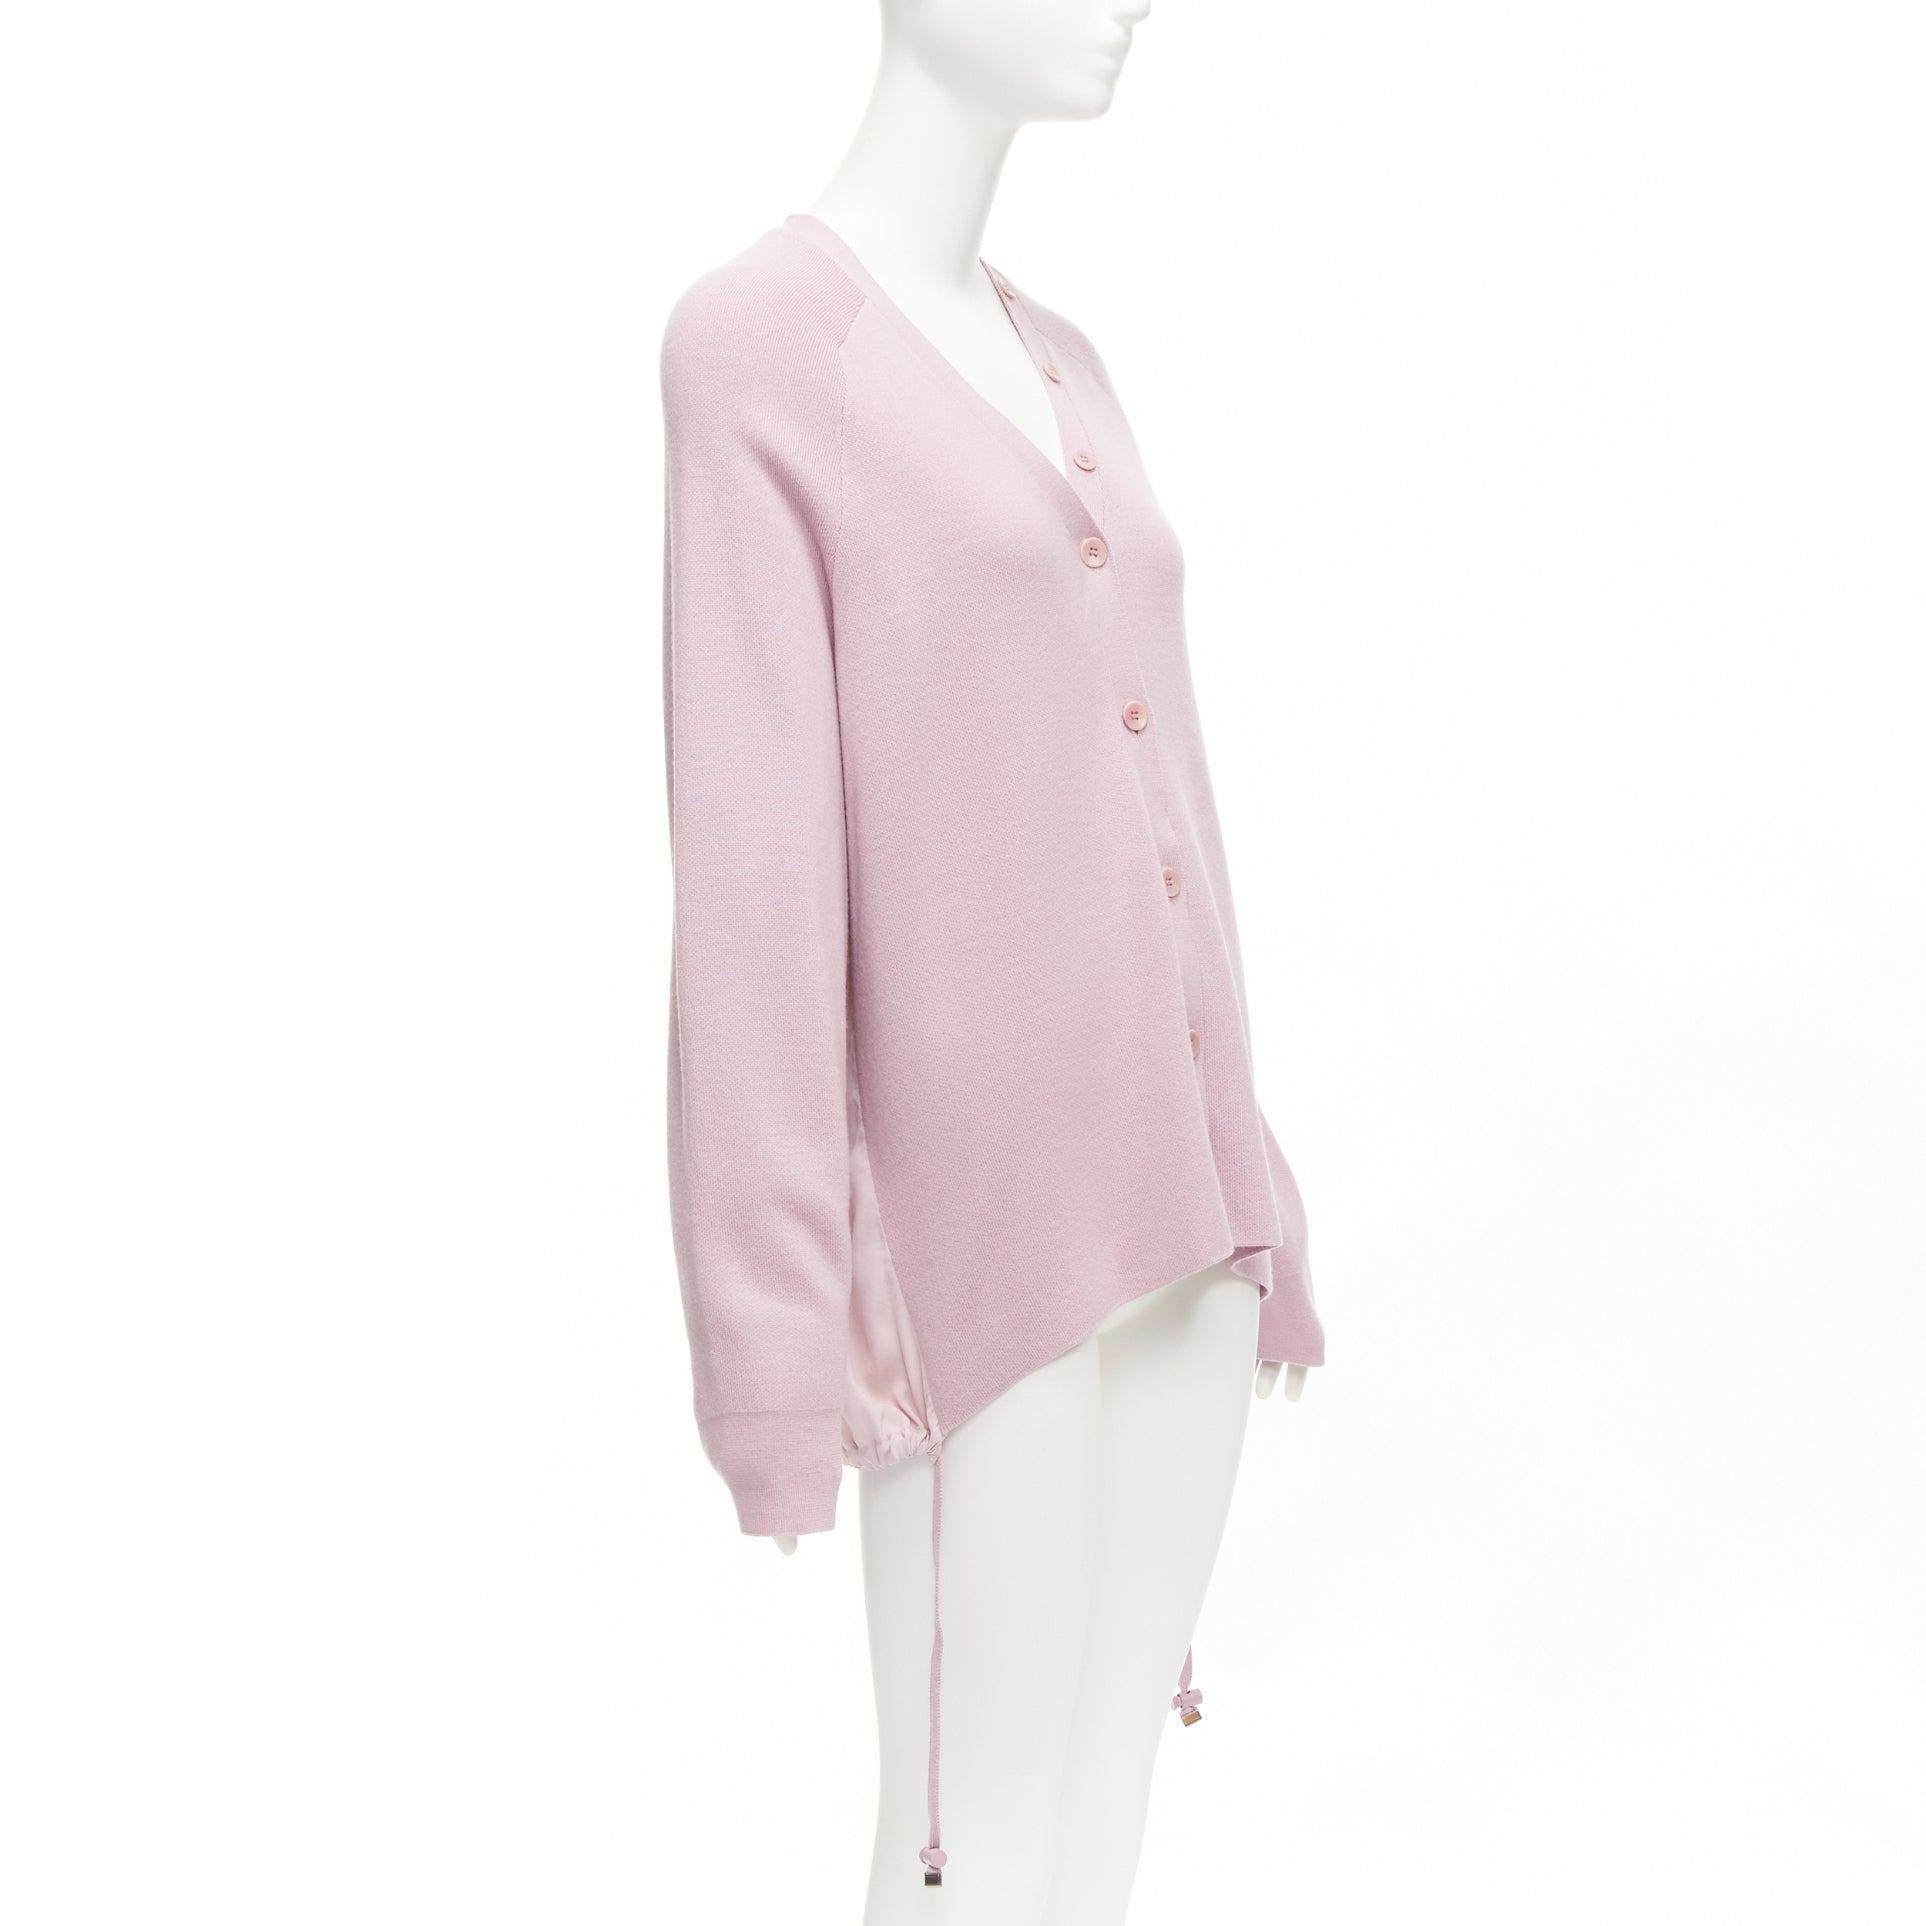 TIBI lilac purple merino wool silk contrast back raglan cardigan XS
Reference: KYCG/A00017
Brand: Tibi
Material: Merino Wool, Silk
Color: Purple
Pattern: Solid
Closure: Button
Extra Details: Drawstring details at sides.
Made in: